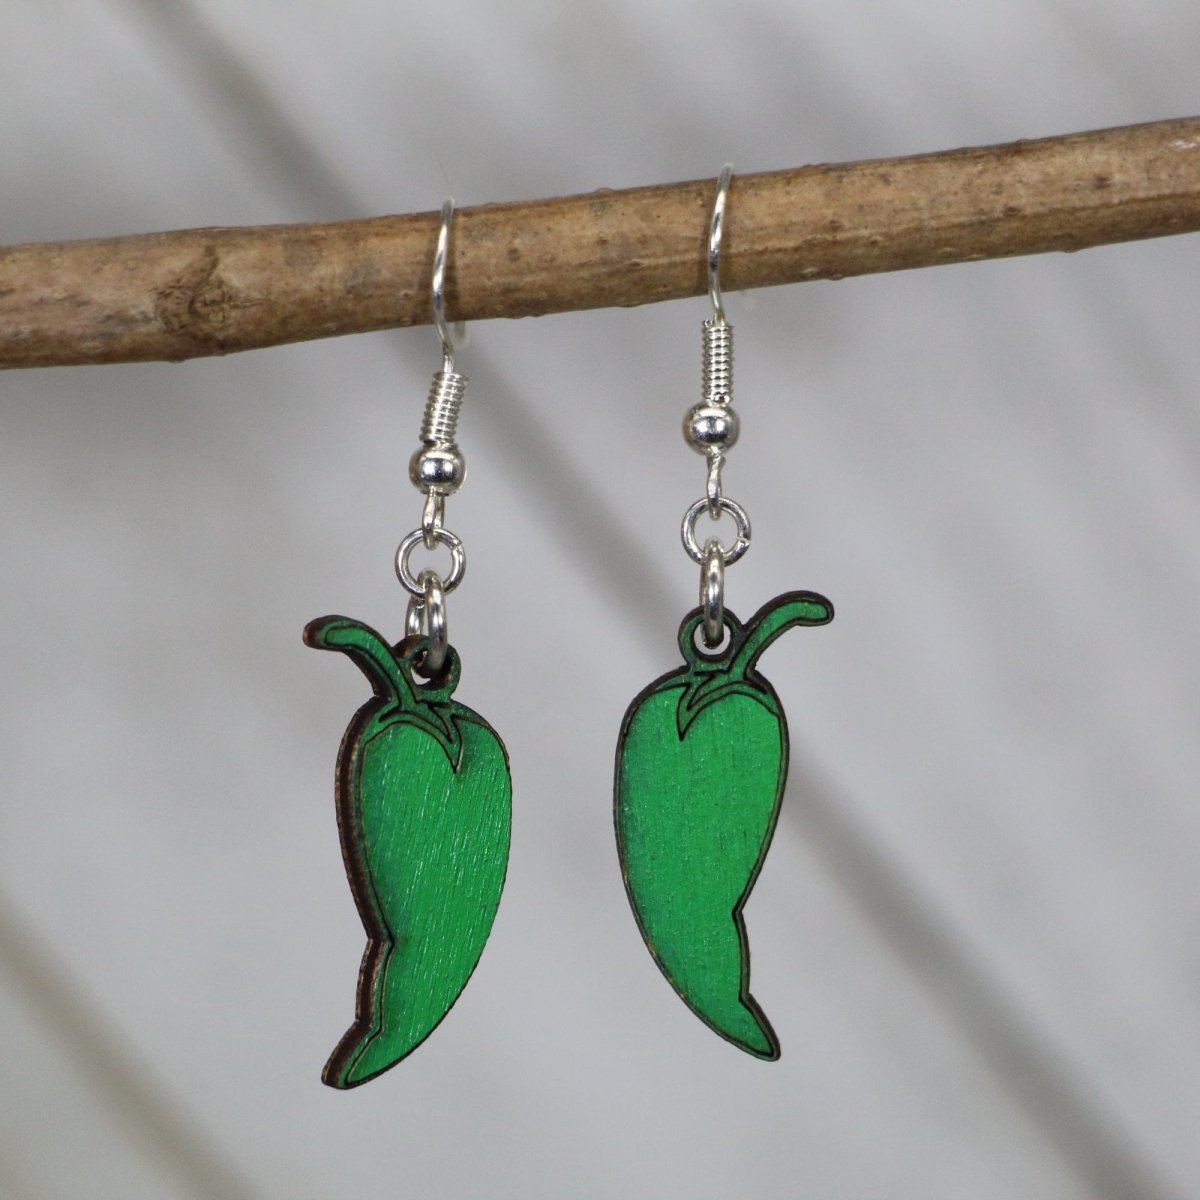 Hatch Green Chili Pepper Wooden Earrings - Dangle - Cate's Concepts, LLC